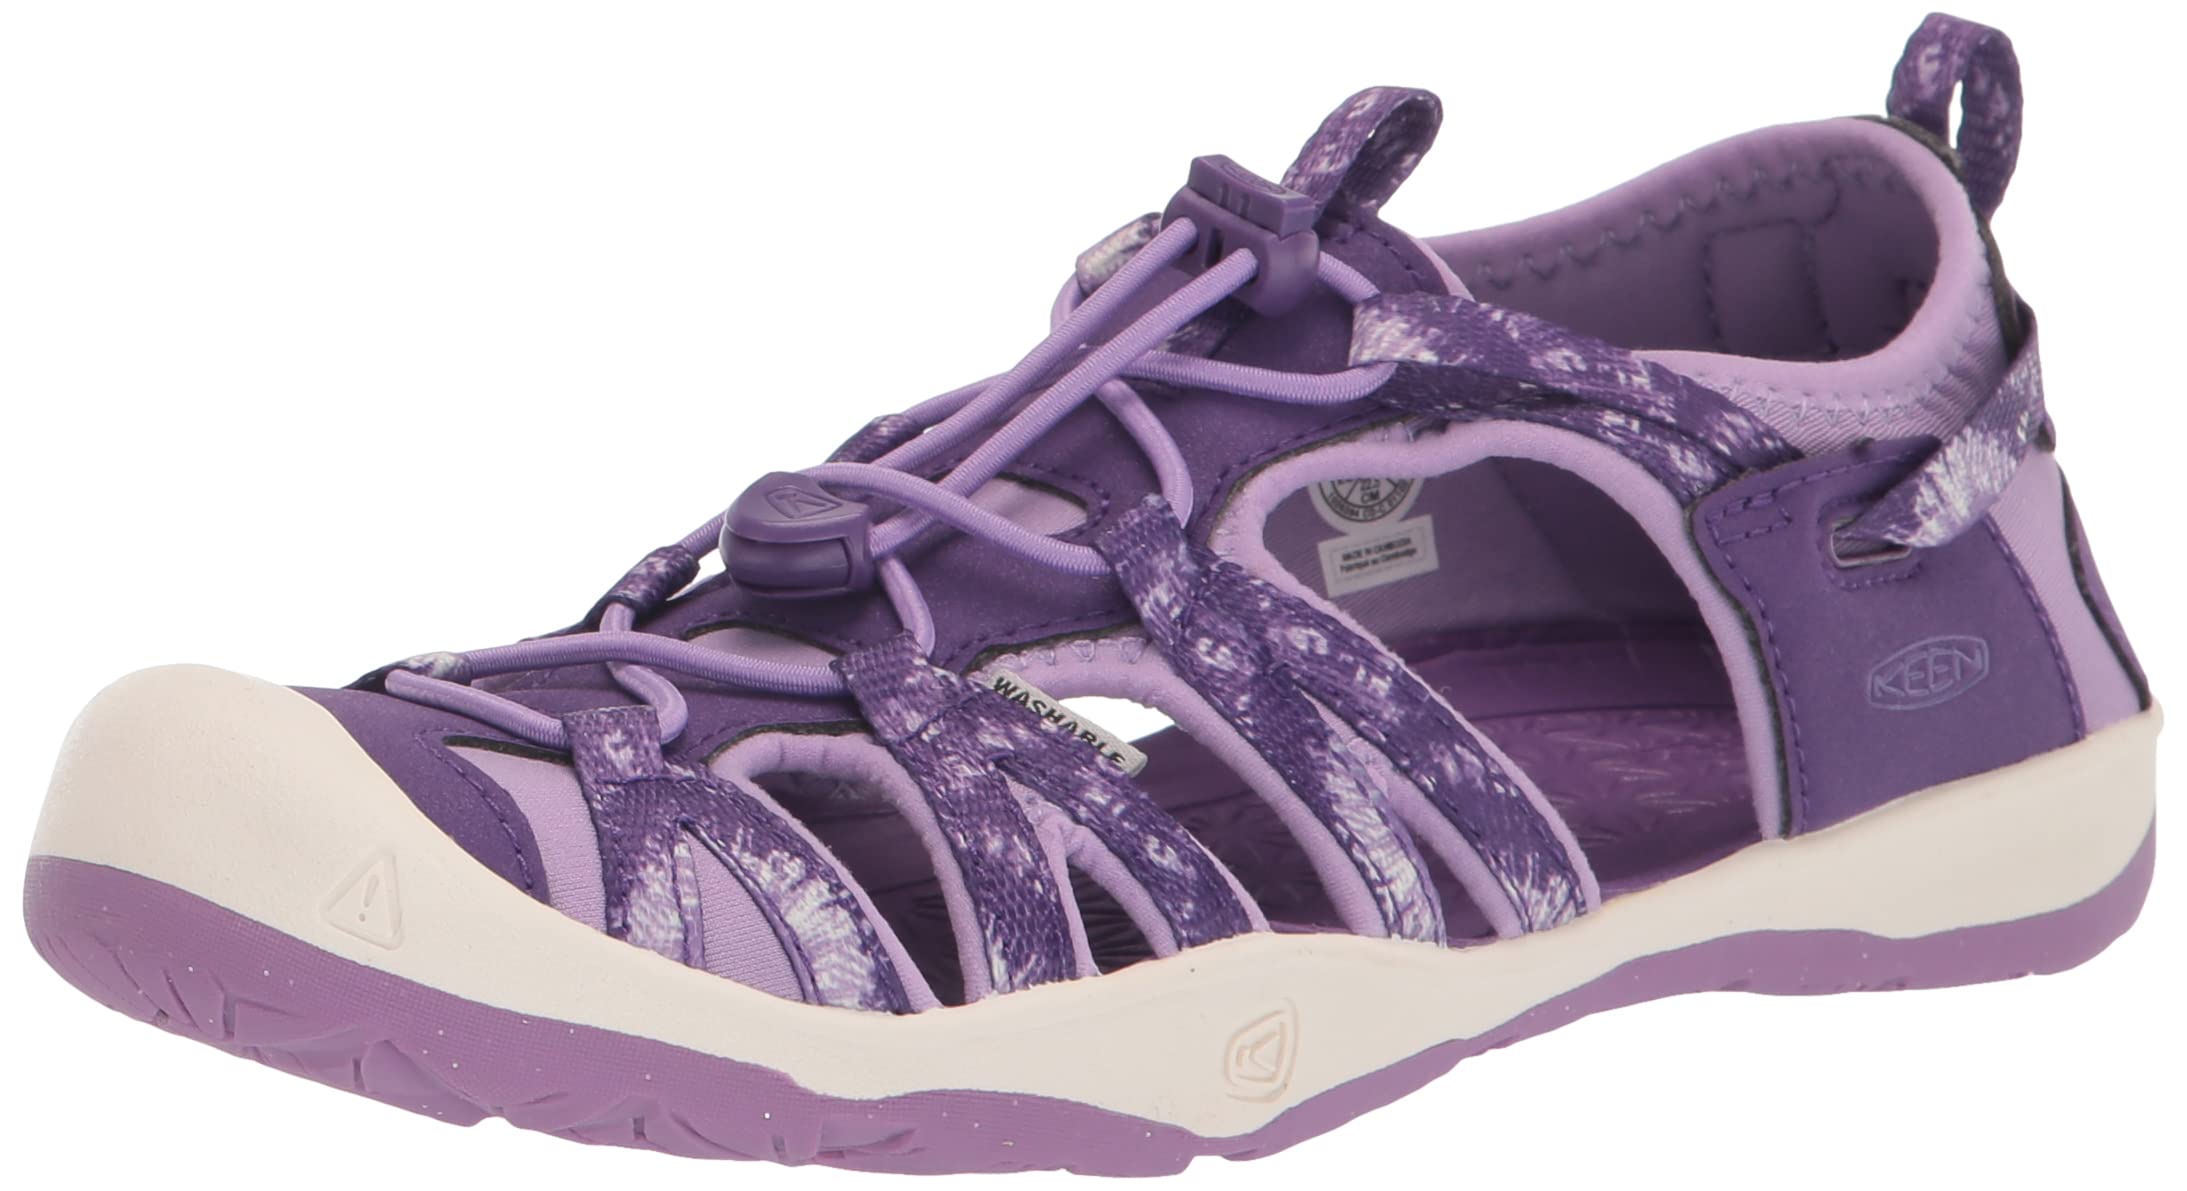 KEEN Kids Moxie Closed Toe Casual Sandals, Multi/English Lavender, 5 US Unisex Toddler